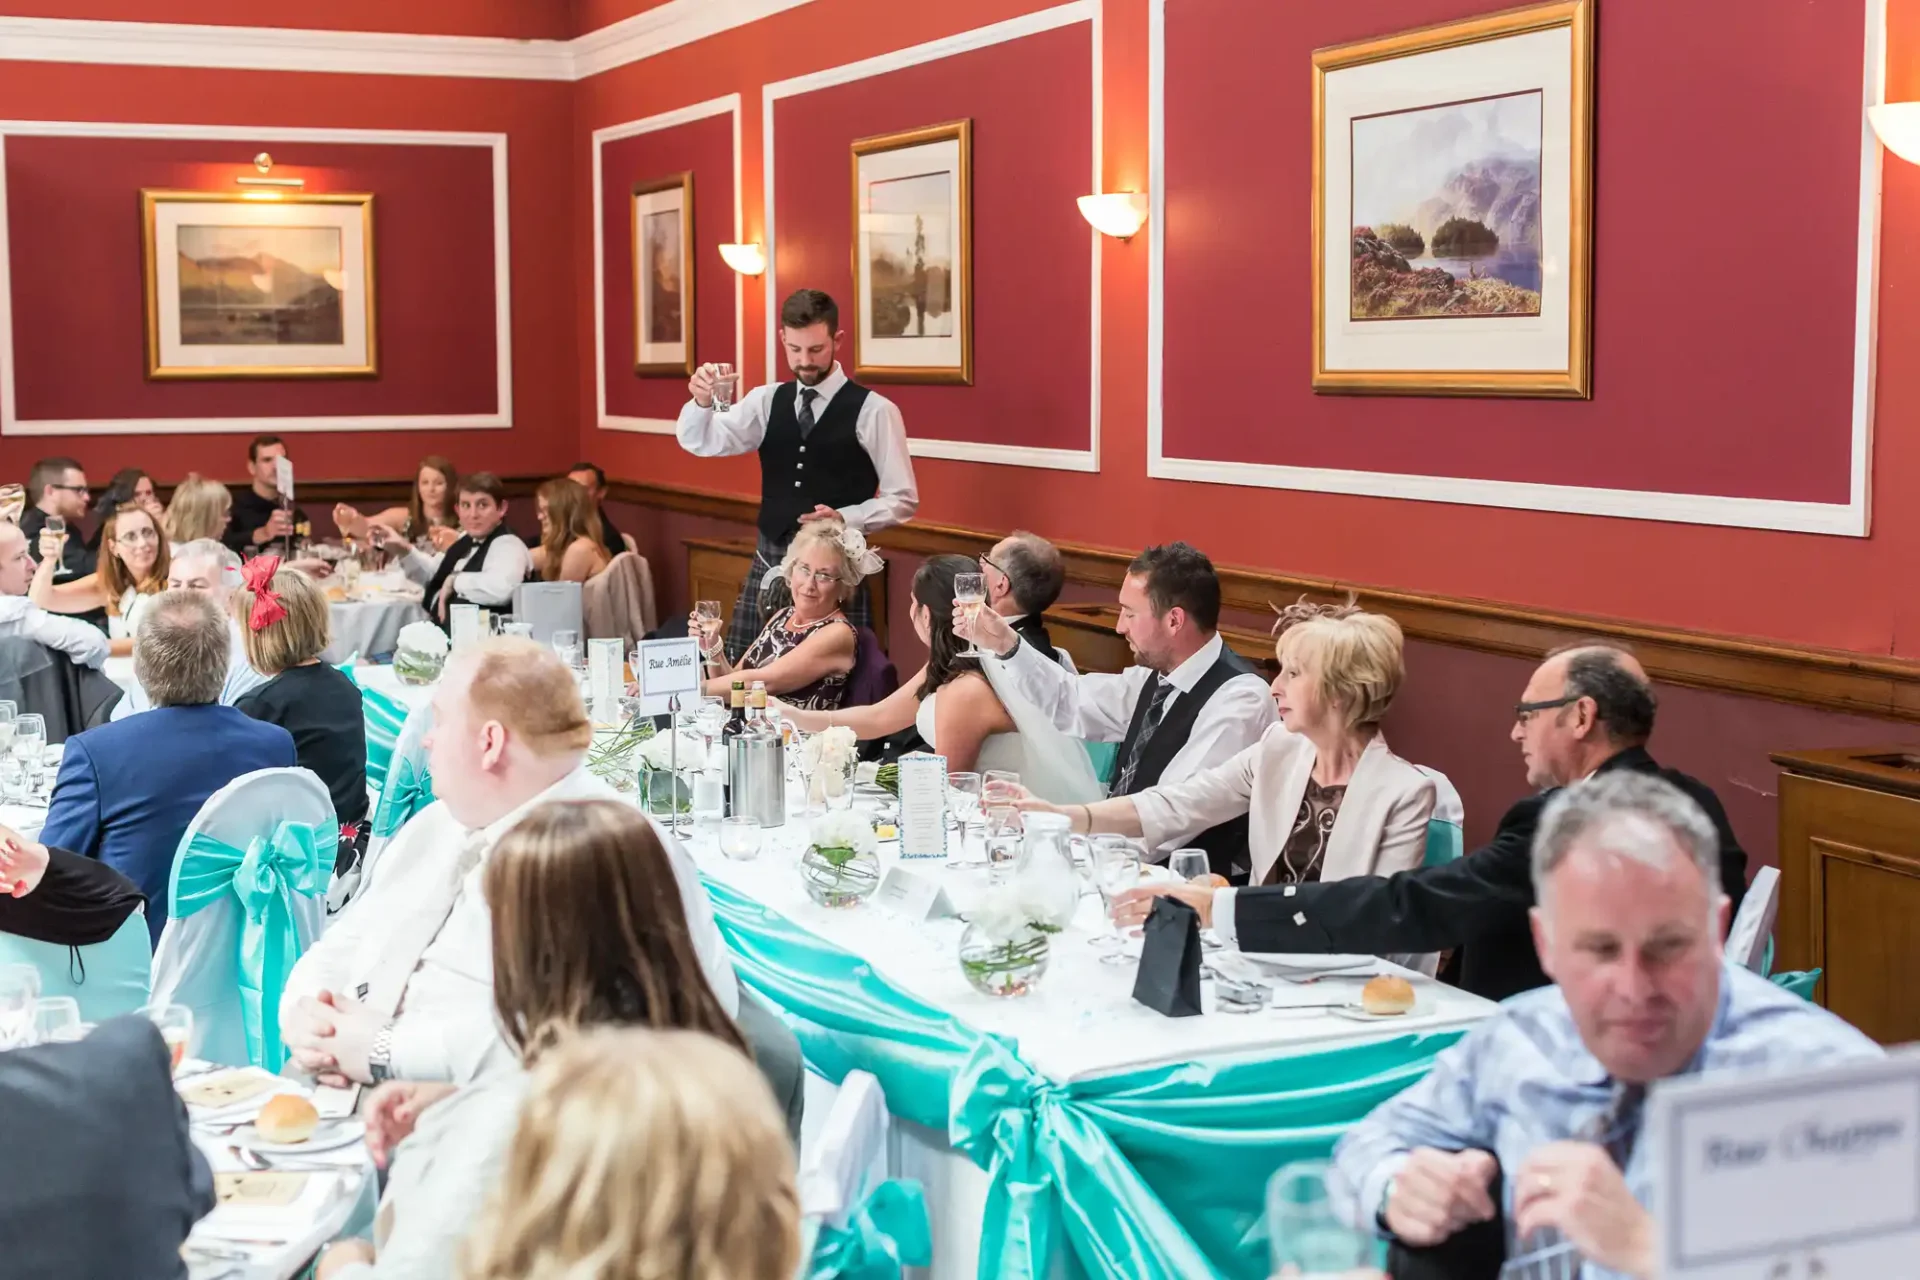 A waiter serving guests at a formal dining event with tables decorated in turquoise and people engaged in conversation.